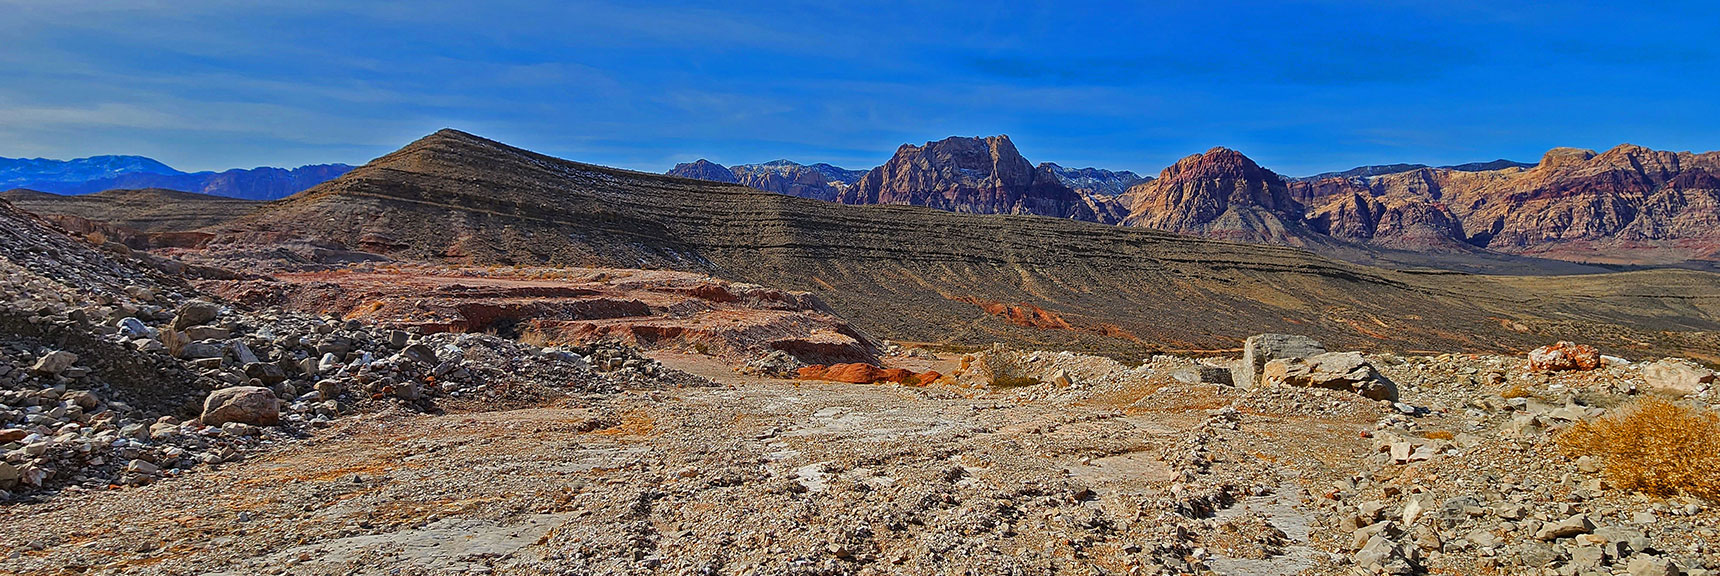 Looking Back to the Western Ridgeline While Ascending Through Mining Operation | Western Outer Circuit | Blue Diamond Hill | Red Rock Canyon, Nevada